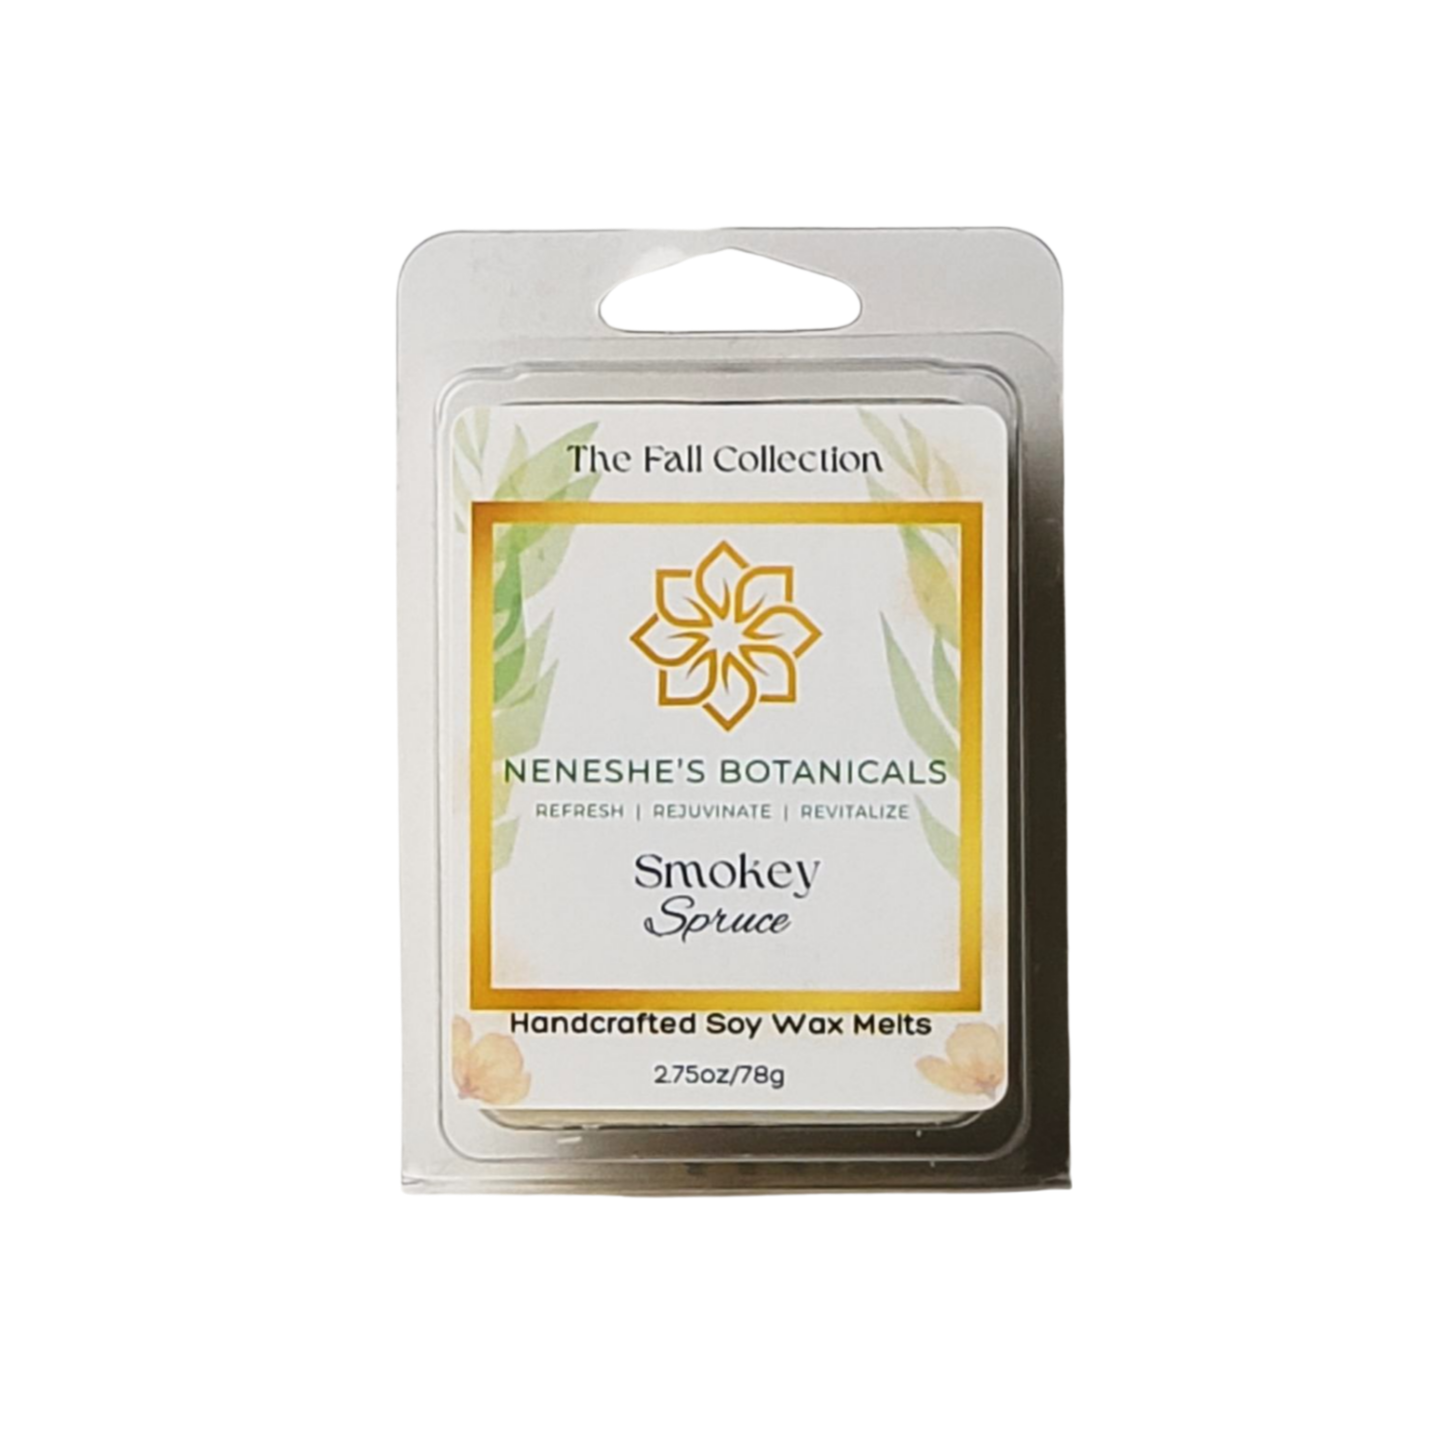 Cinnamon Soy Wax Melts – Glenbrook Farms Herbs and Such